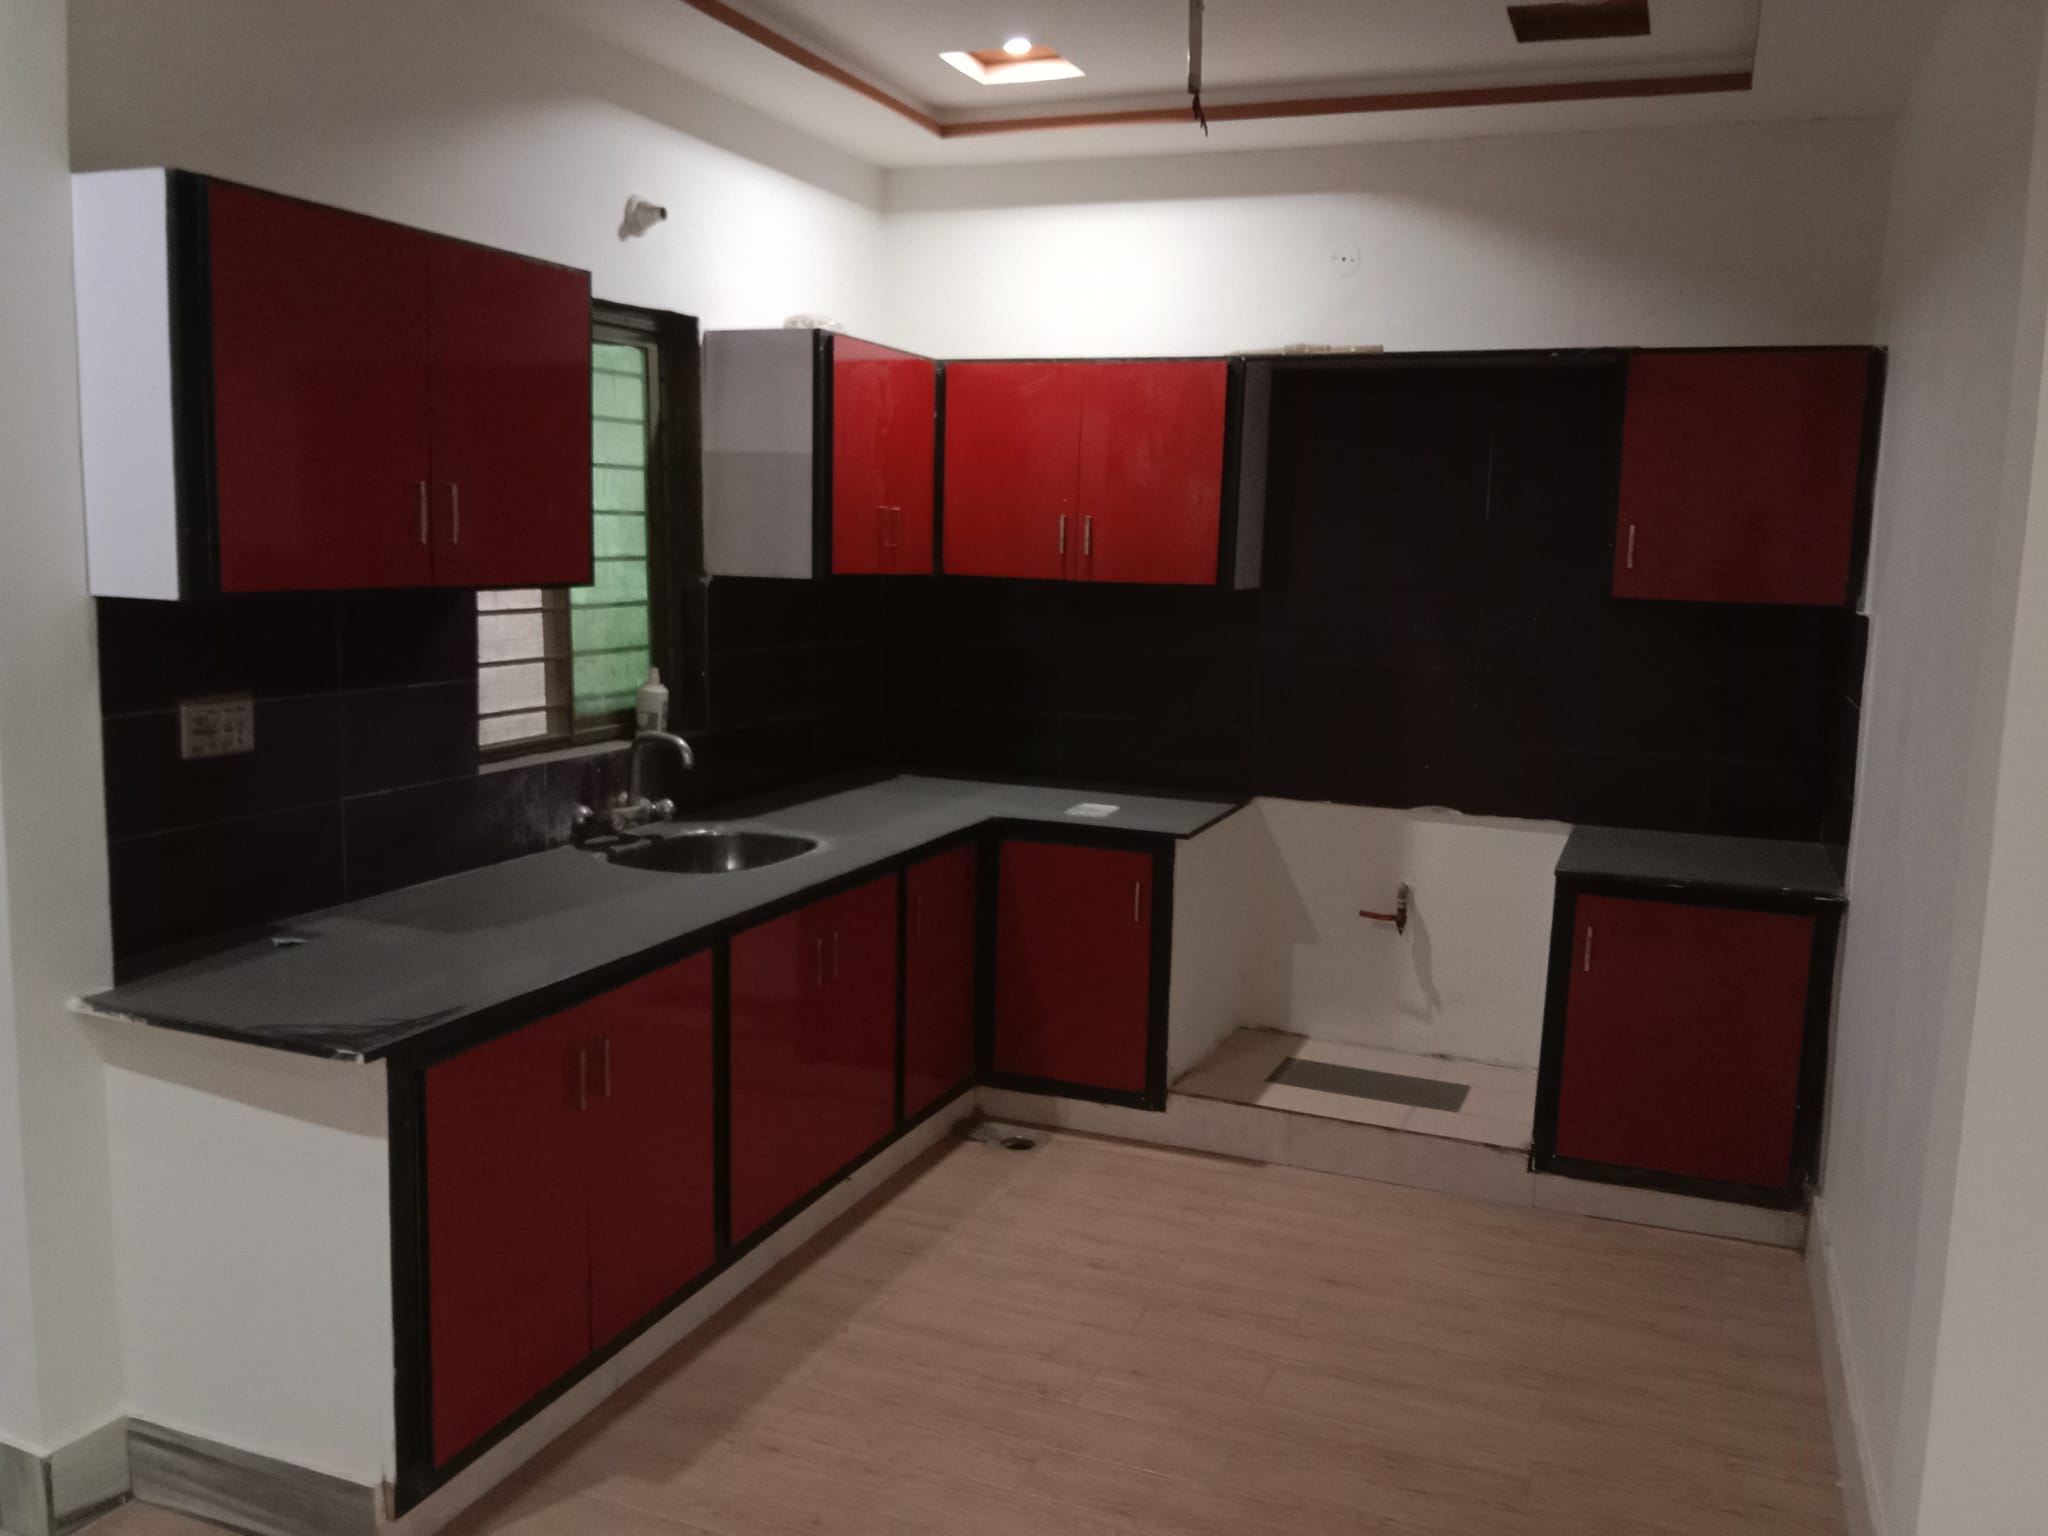 7 Marla Beautiful House For Sale in Model Town T Chowk  Mid Land Colony Multan